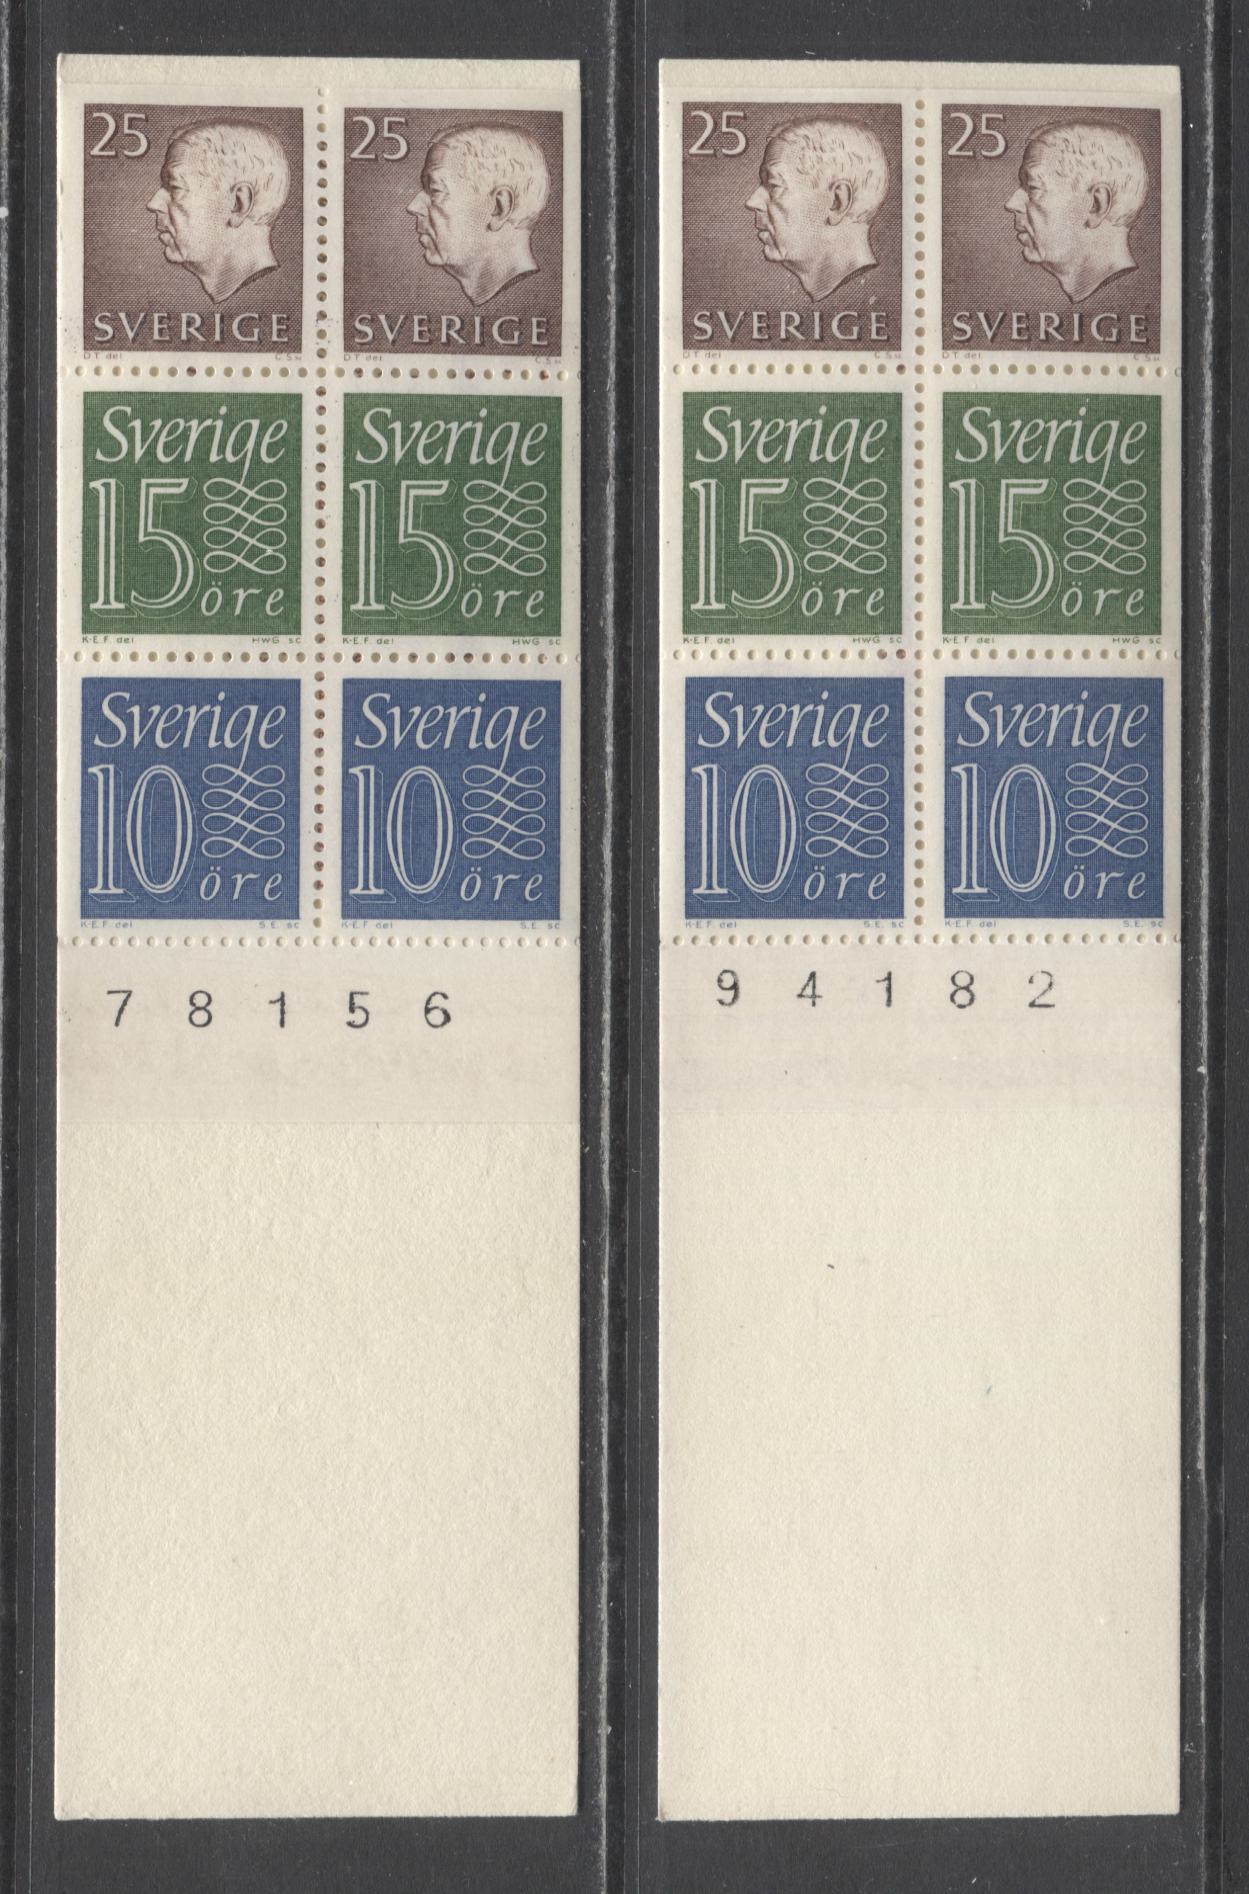 Lot 152 Sweden SC#580a (Facit #HA14C3/D1 1965-1966 Re-Engraved King Gustav VI Adolf Definitive Issue, Both With Full 6 Digit Control Number in Selvedge, No Sneds and Inverted Panes, Estimated Value $22.75